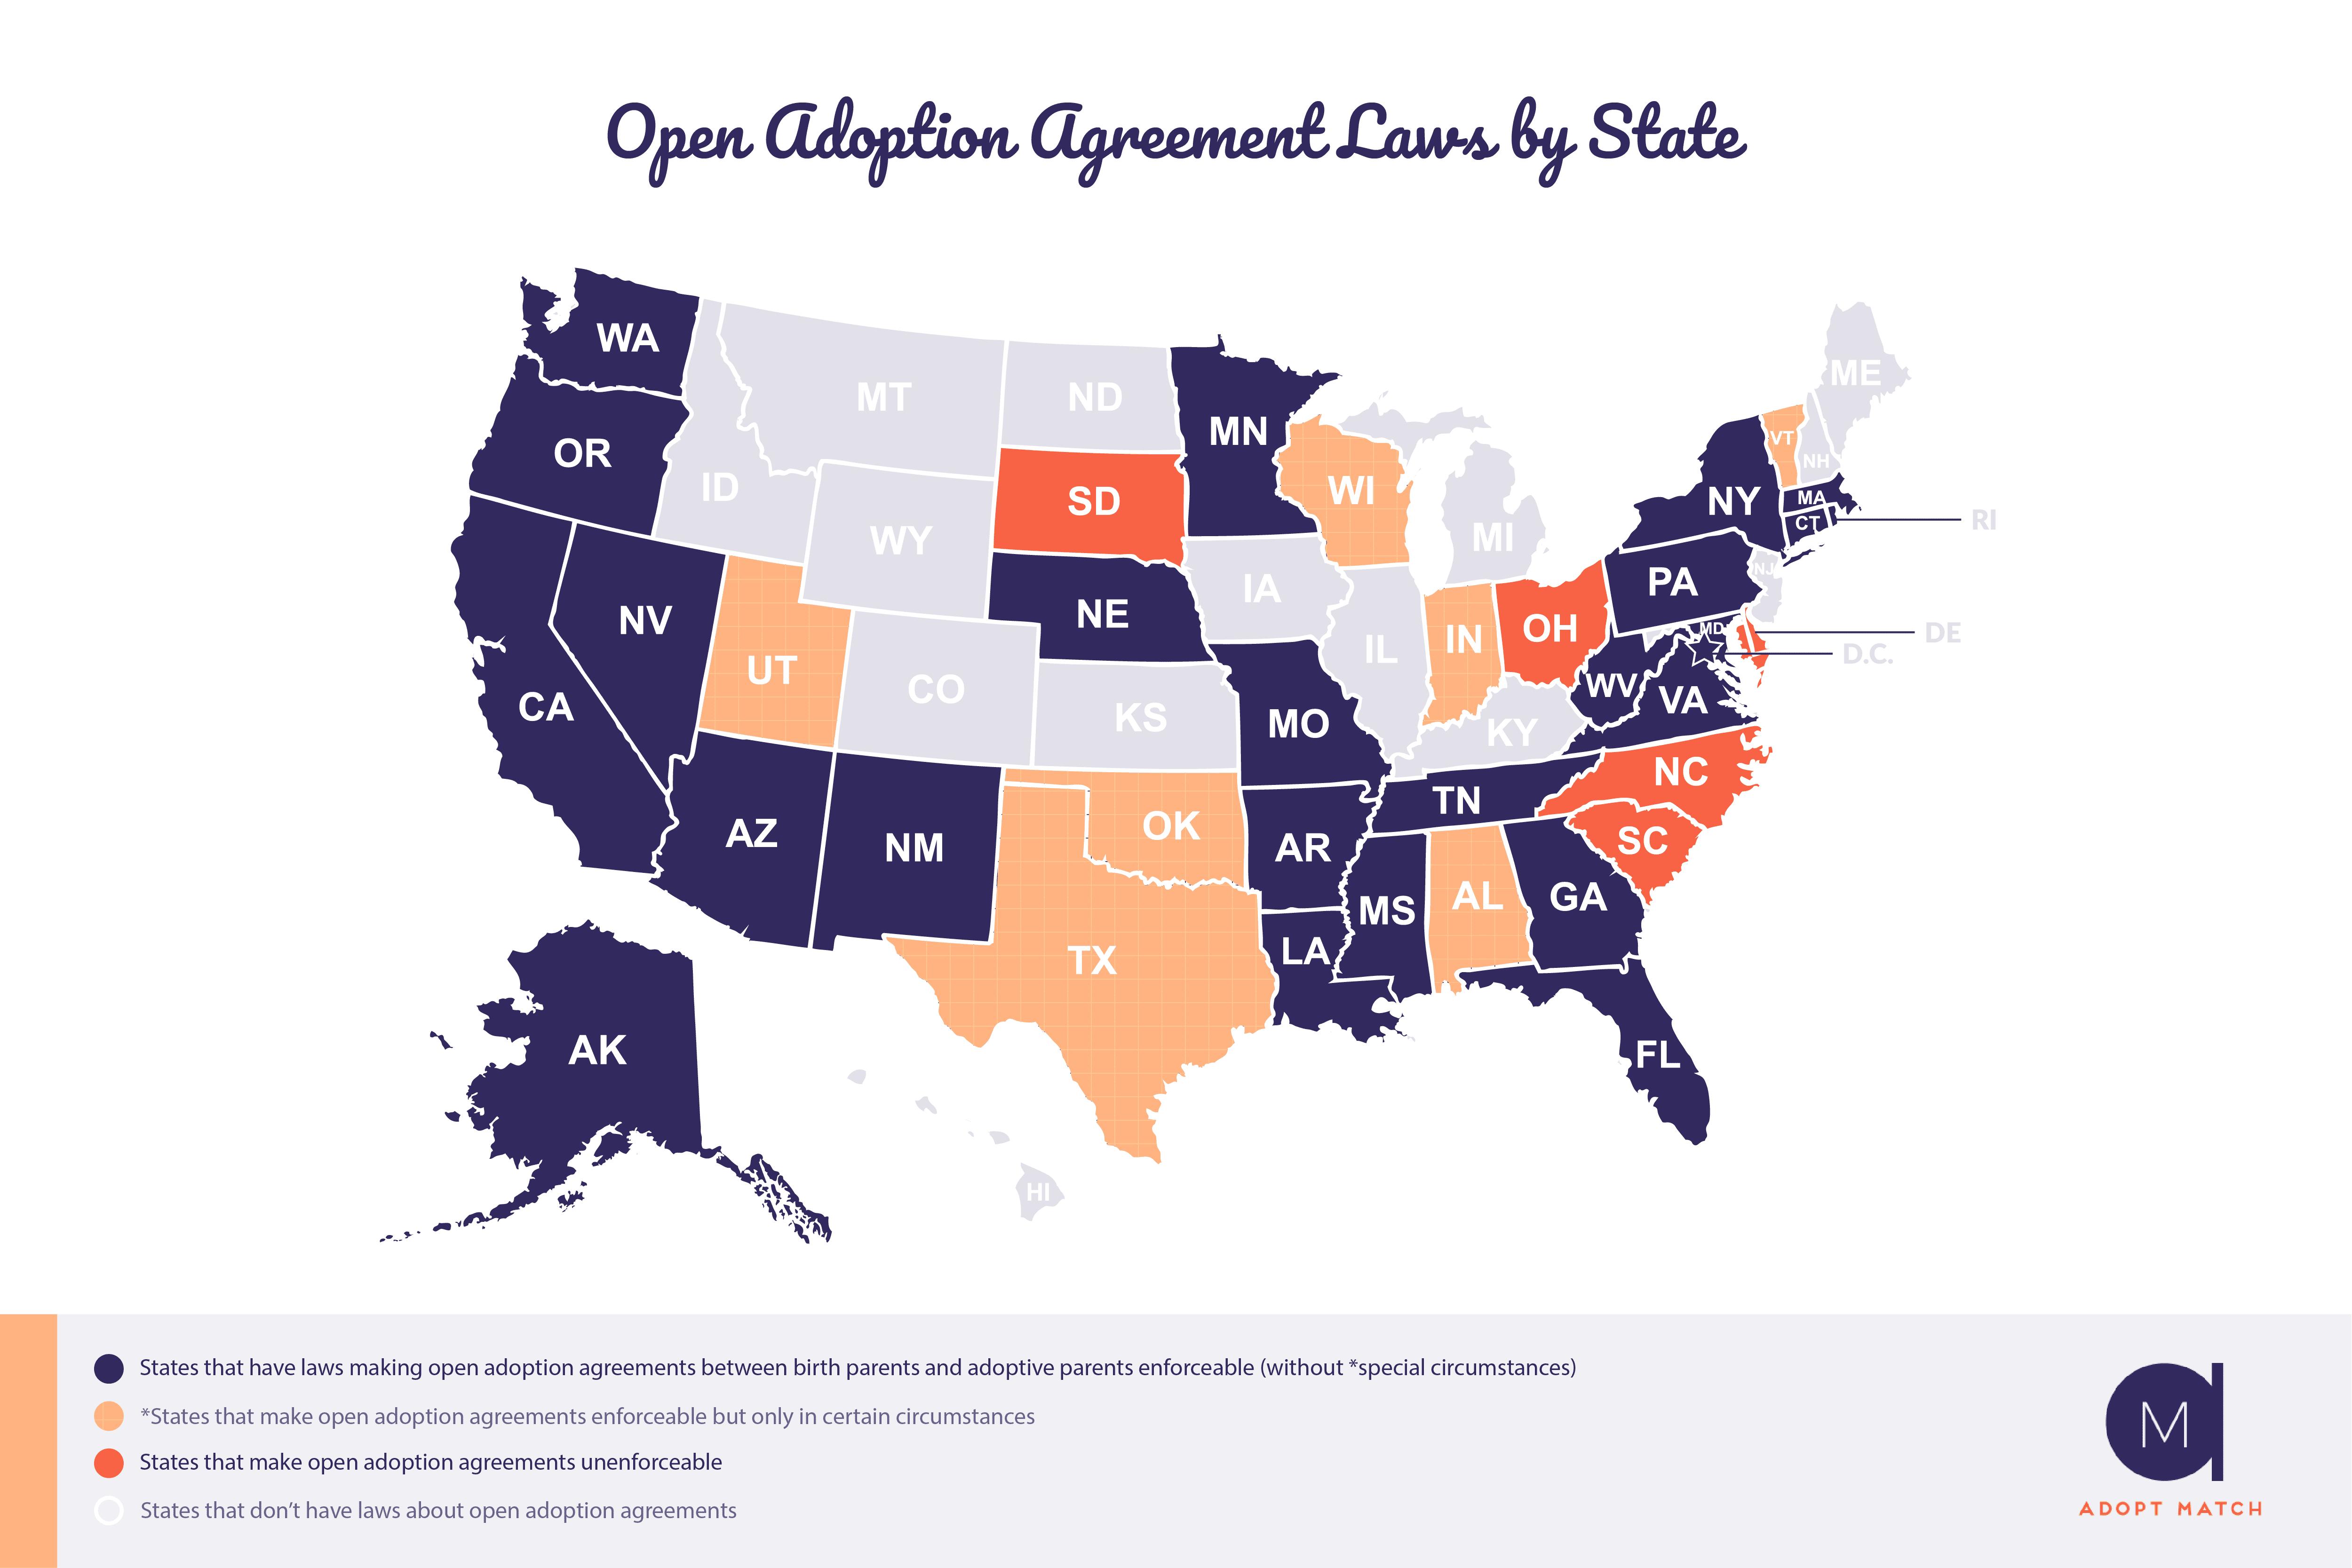 Open Adoption Agreement Laws by State